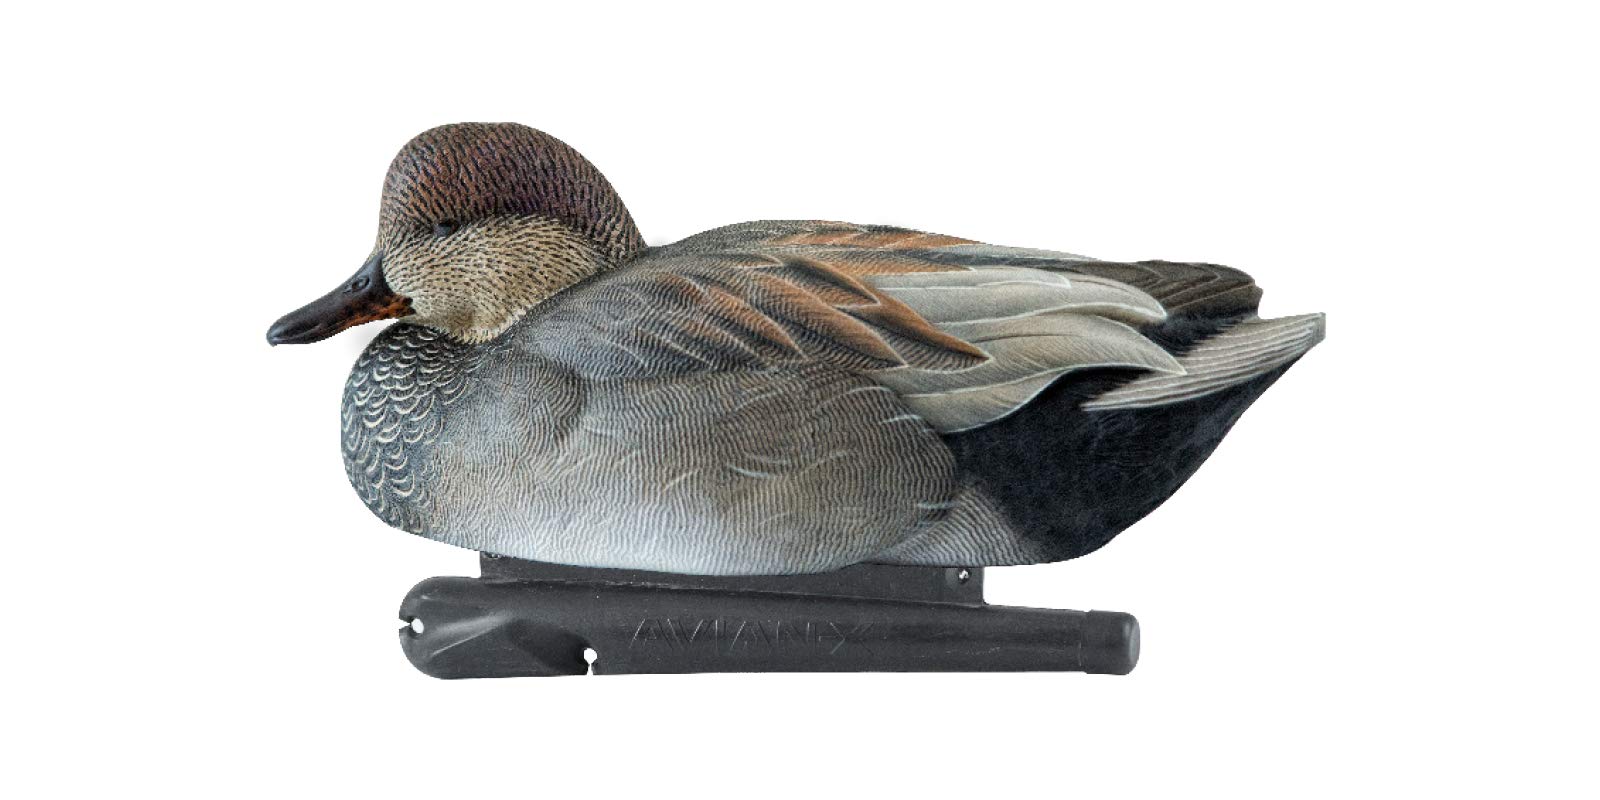 Avian-X Topflight Gadwall Durable Ultra Realistic Floating Hunting Duck Decoys, Pack of 6, AVX8085